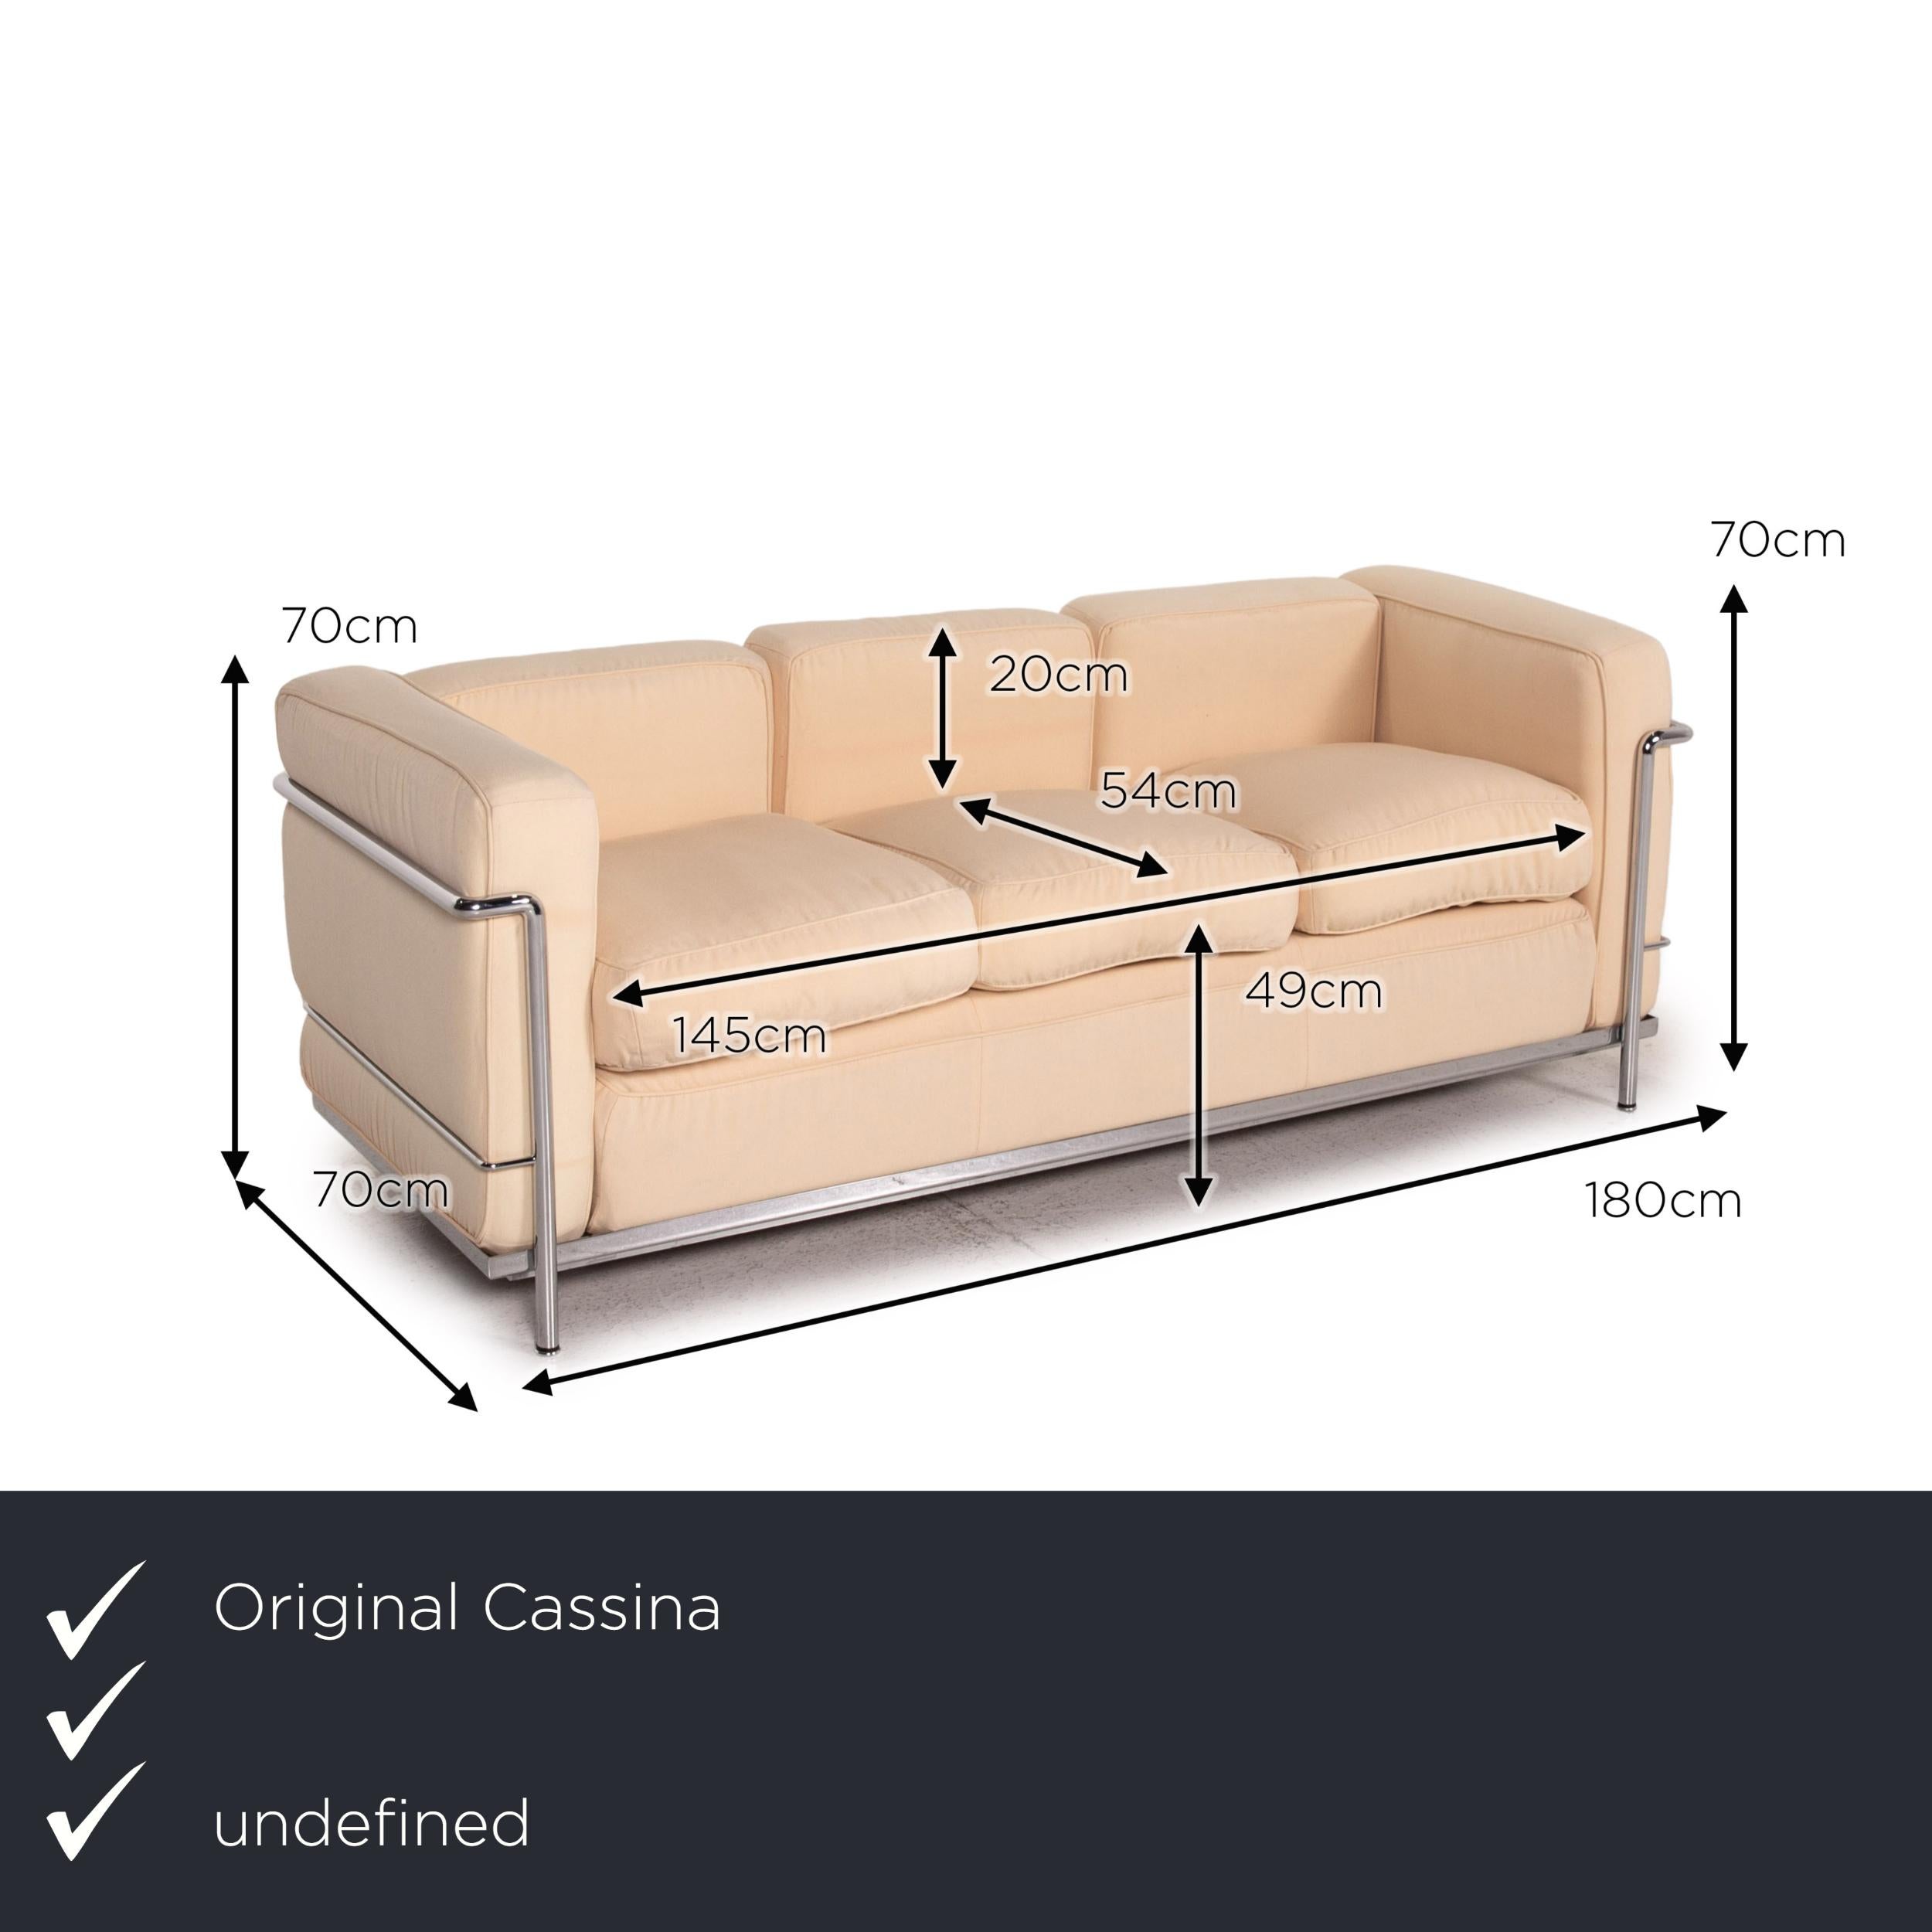 We present to you a Cassina LC 4 Le Corbusier fabric sofa set beige 1x three-seater 1x two-seater.

Product measurements in centimeters:

Depth 70
Width 180
Height 70
Seat height 49
Rest height 70
Seat depth 54
Seat width 145
Back height